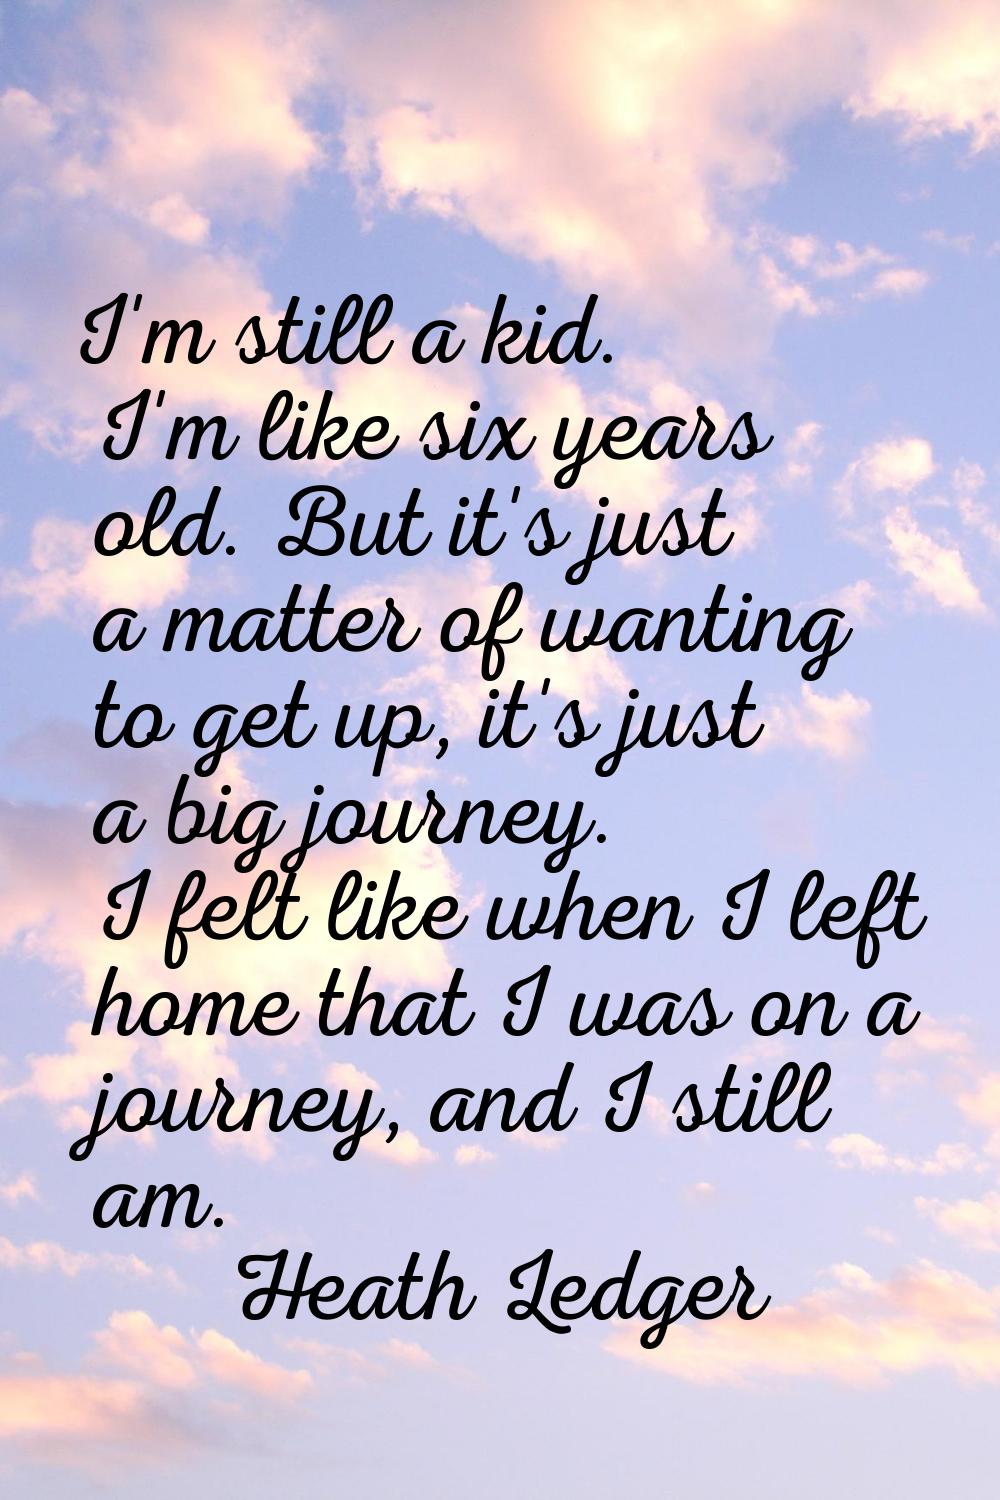 I'm still a kid. I'm like six years old. But it's just a matter of wanting to get up, it's just a b